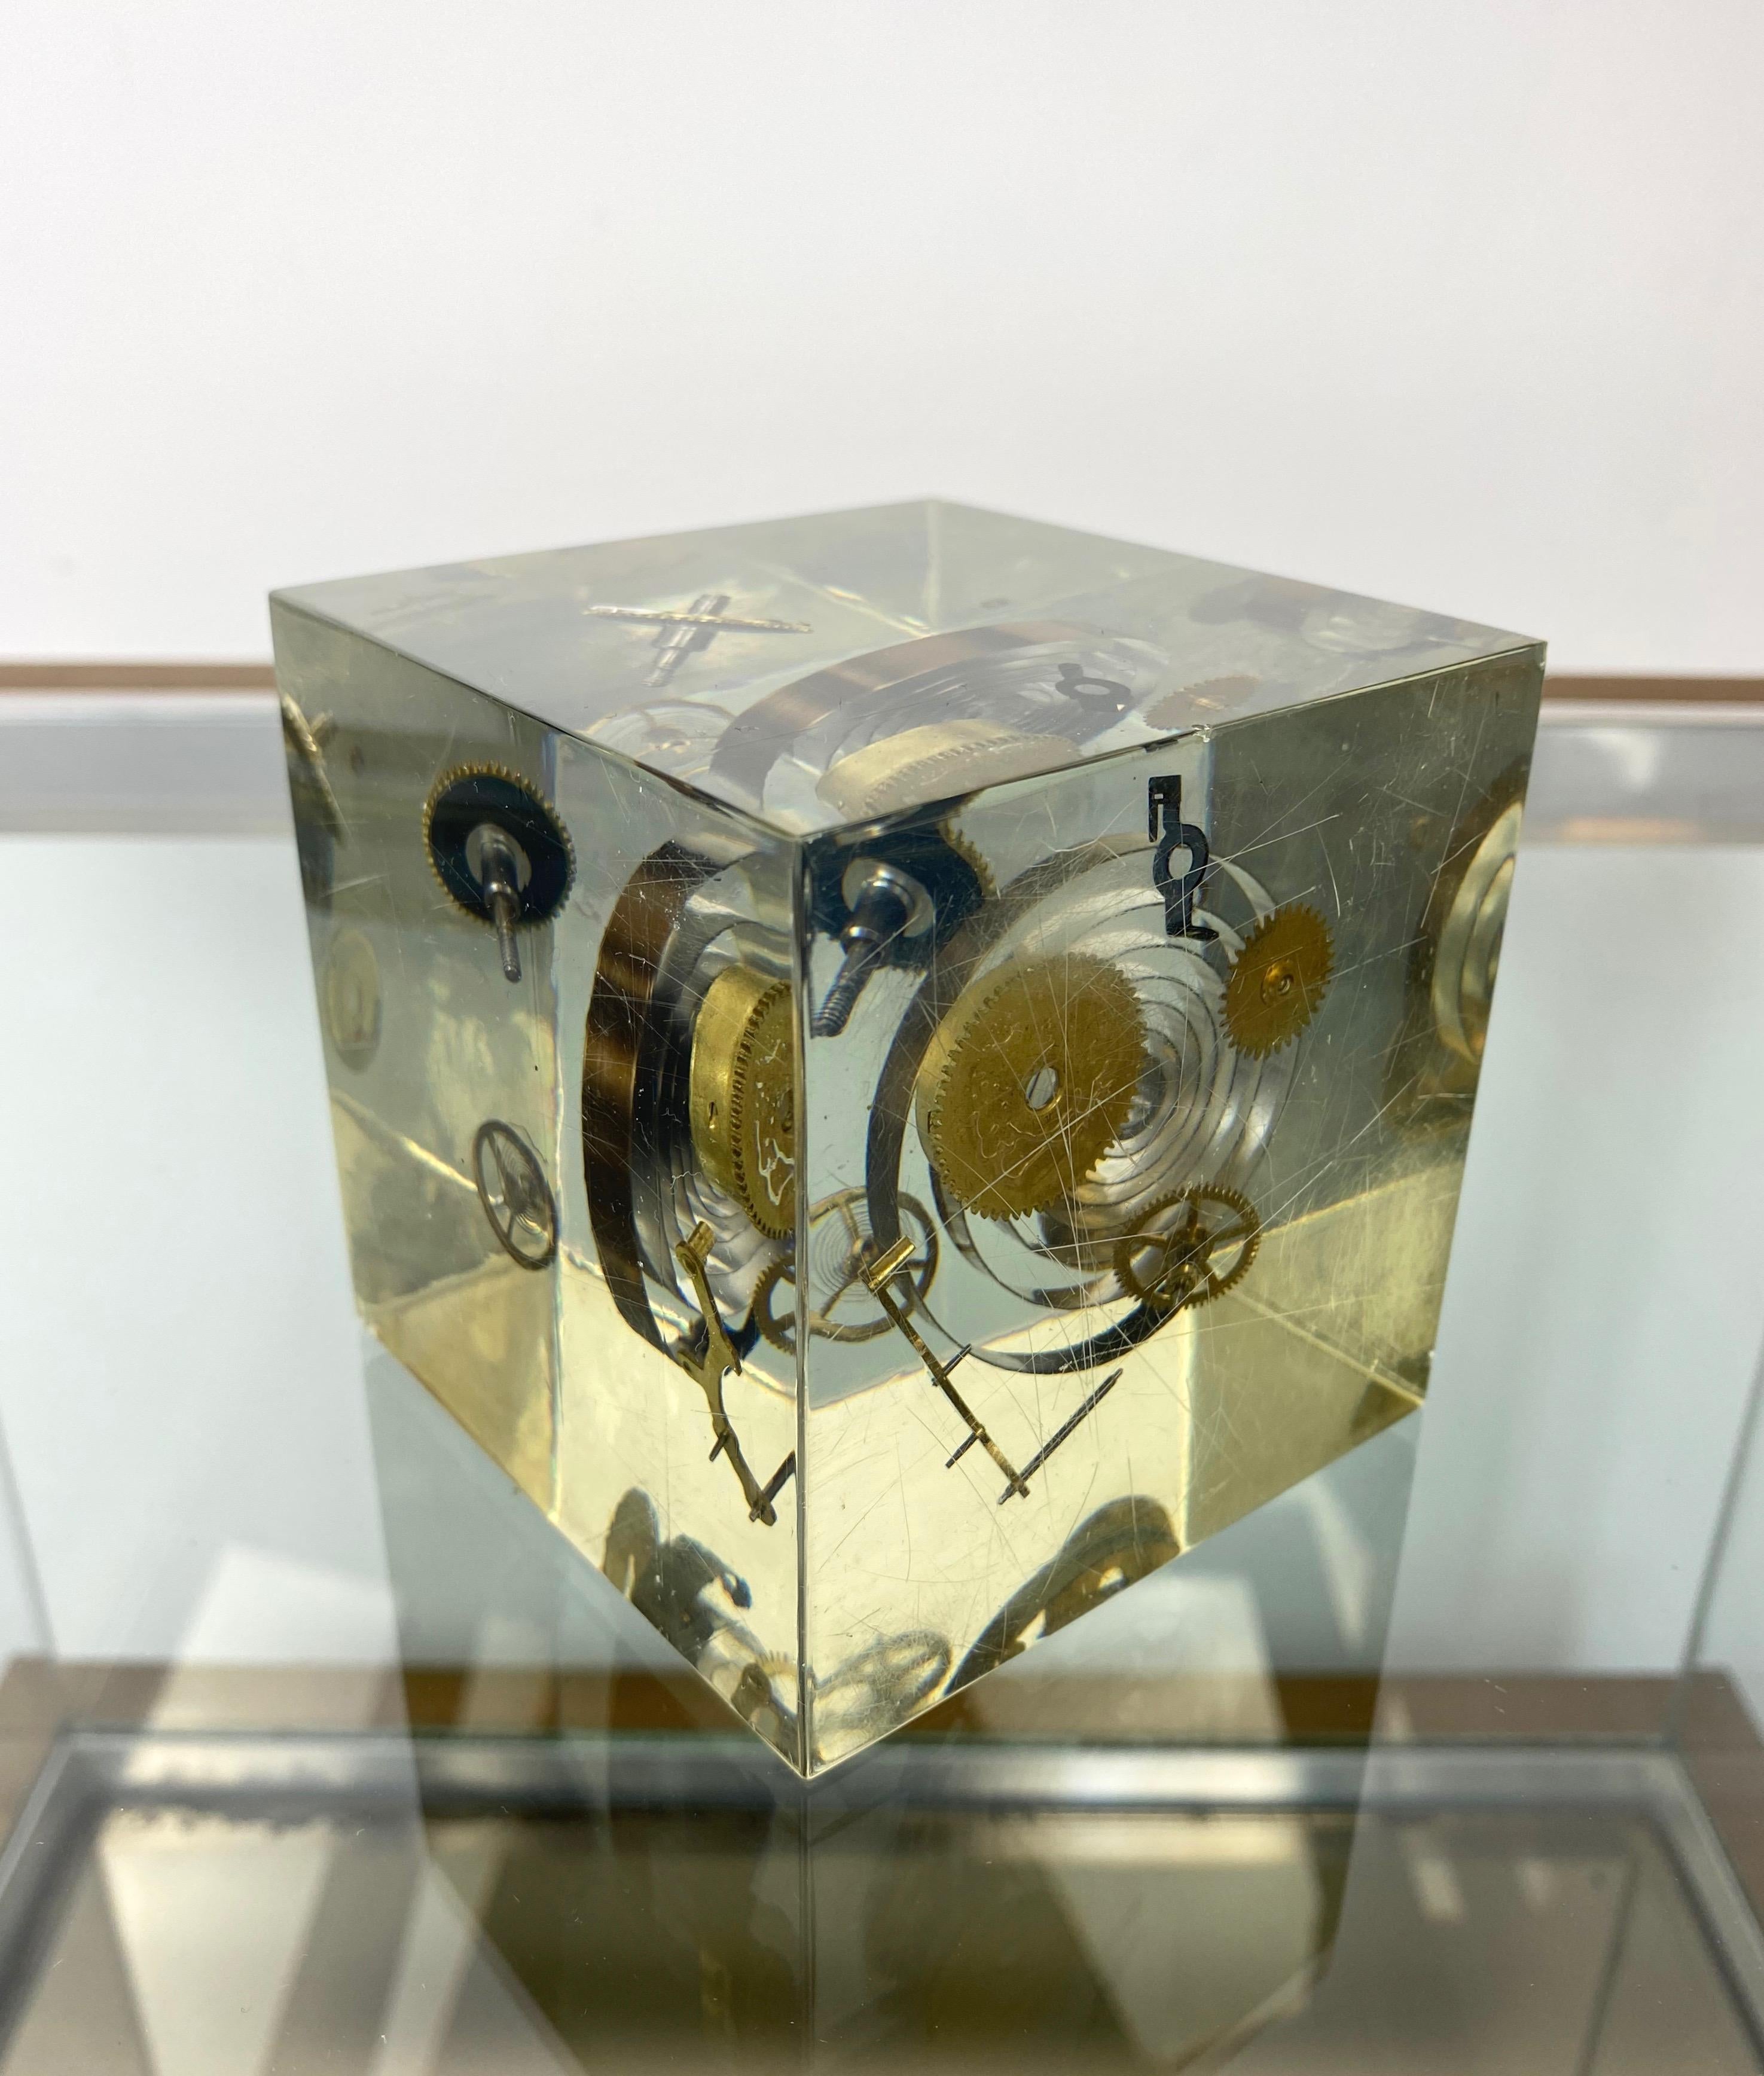 Metal Acrylic Cube Sculpture Paperweight with Clock Parts by Pierre Giraudon, 1970s For Sale